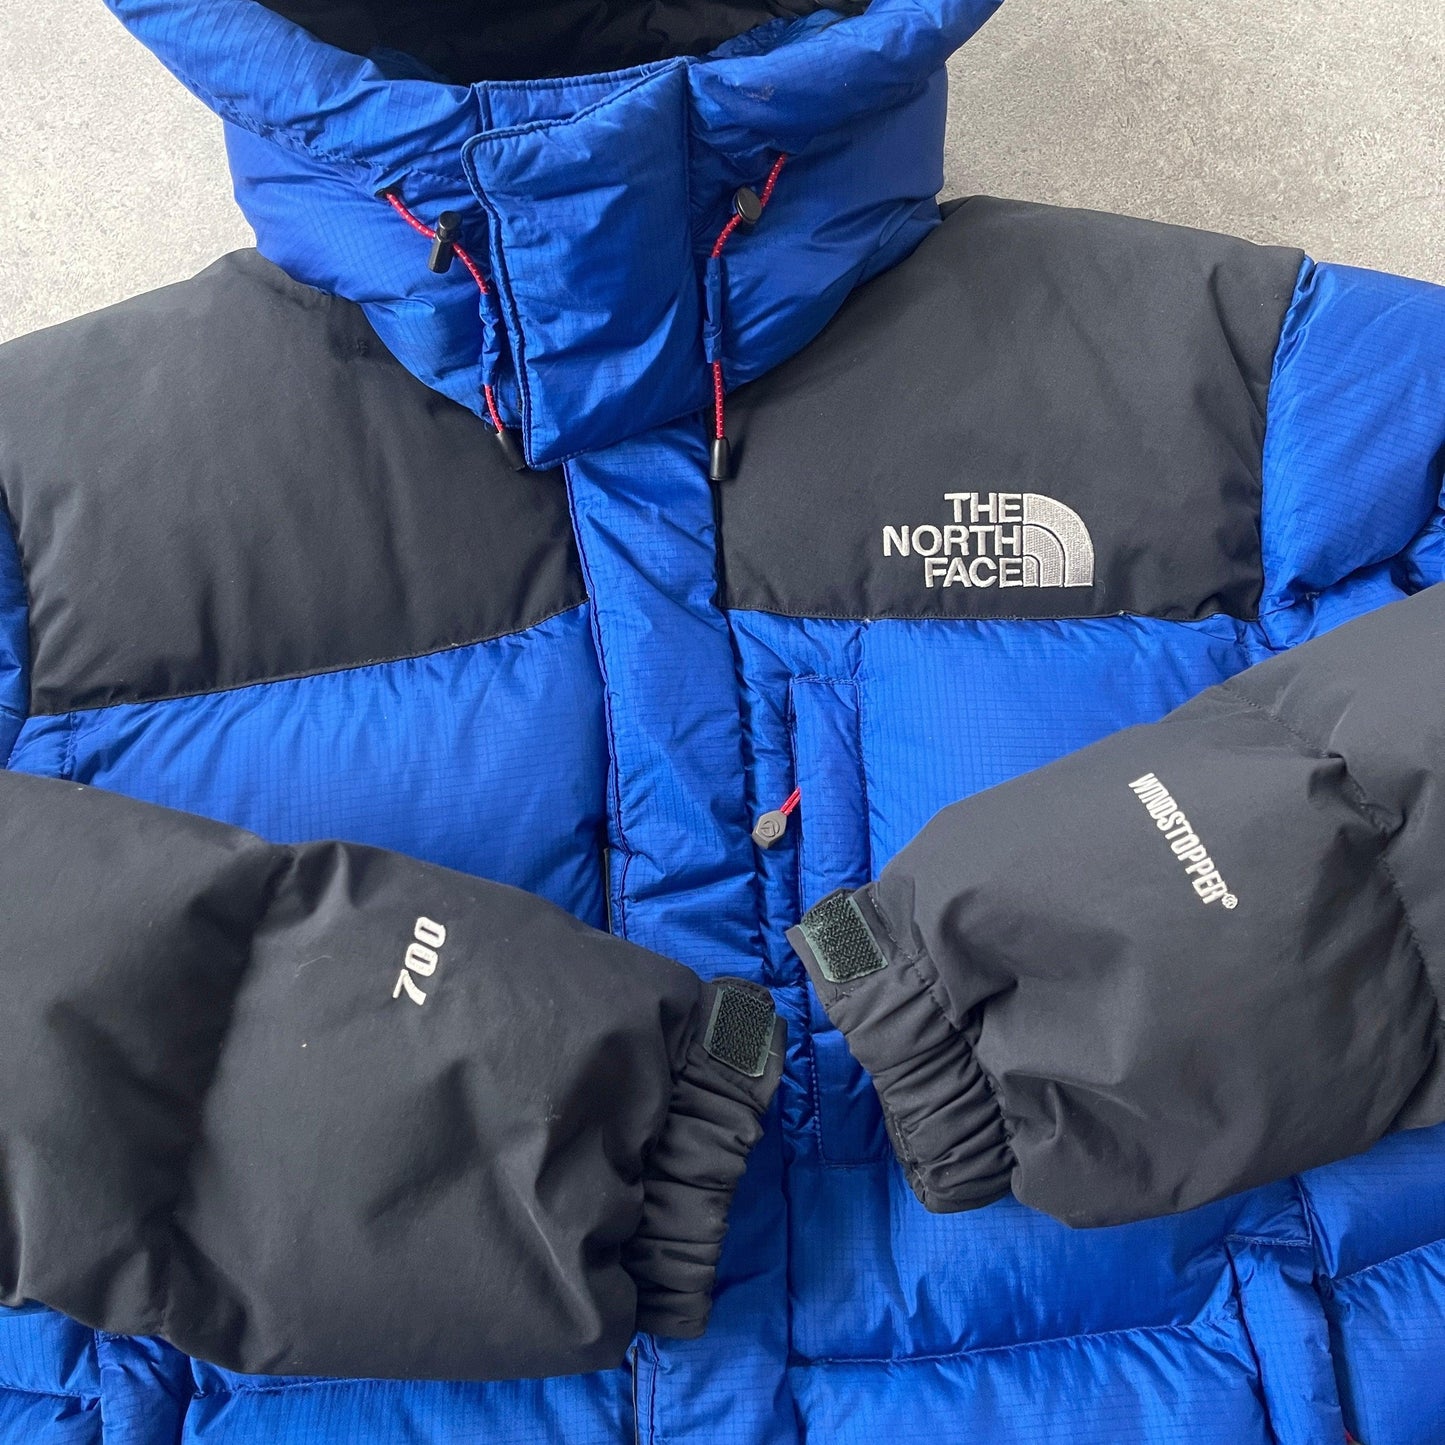 The North Face Baltoro 700 down fill windstopper puffer jacket (XL) - Known Source